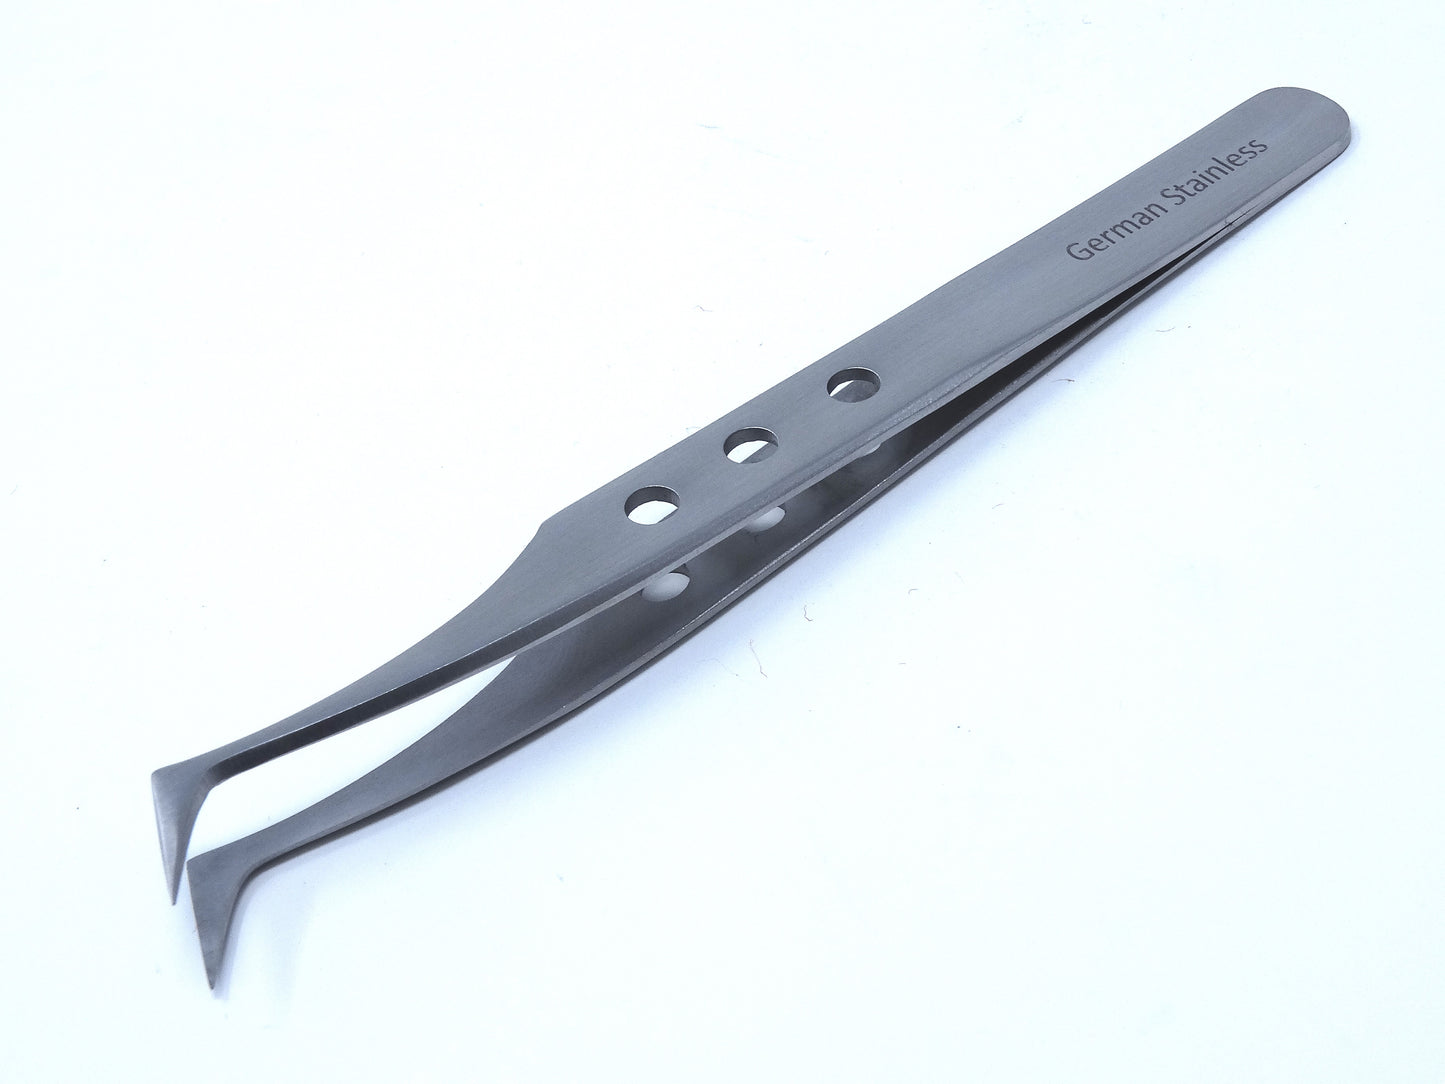 Stainless Steel Micro Surgical Forceps Tweezers Semi Angled, Fenestrated Handle, Premium Quality